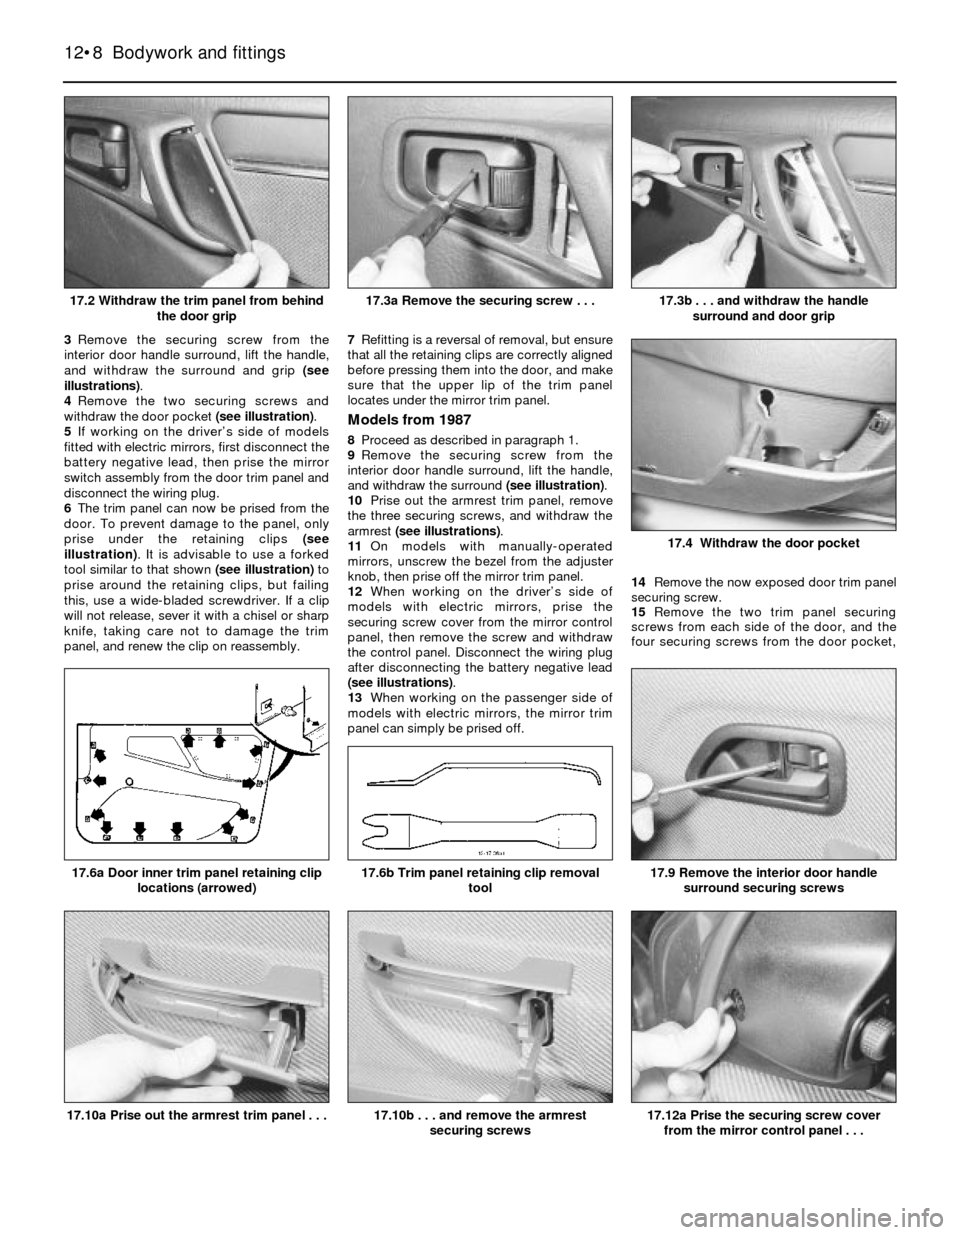 FORD SIERRA 1984 1.G Bodywork And Fittings Workshop Manual 3Remove the securing screw from the
interior door handle surround, lift the handle,
and withdraw the surround and grip (see
illustrations).
4Remove the two securing screws and
withdraw the door pocket